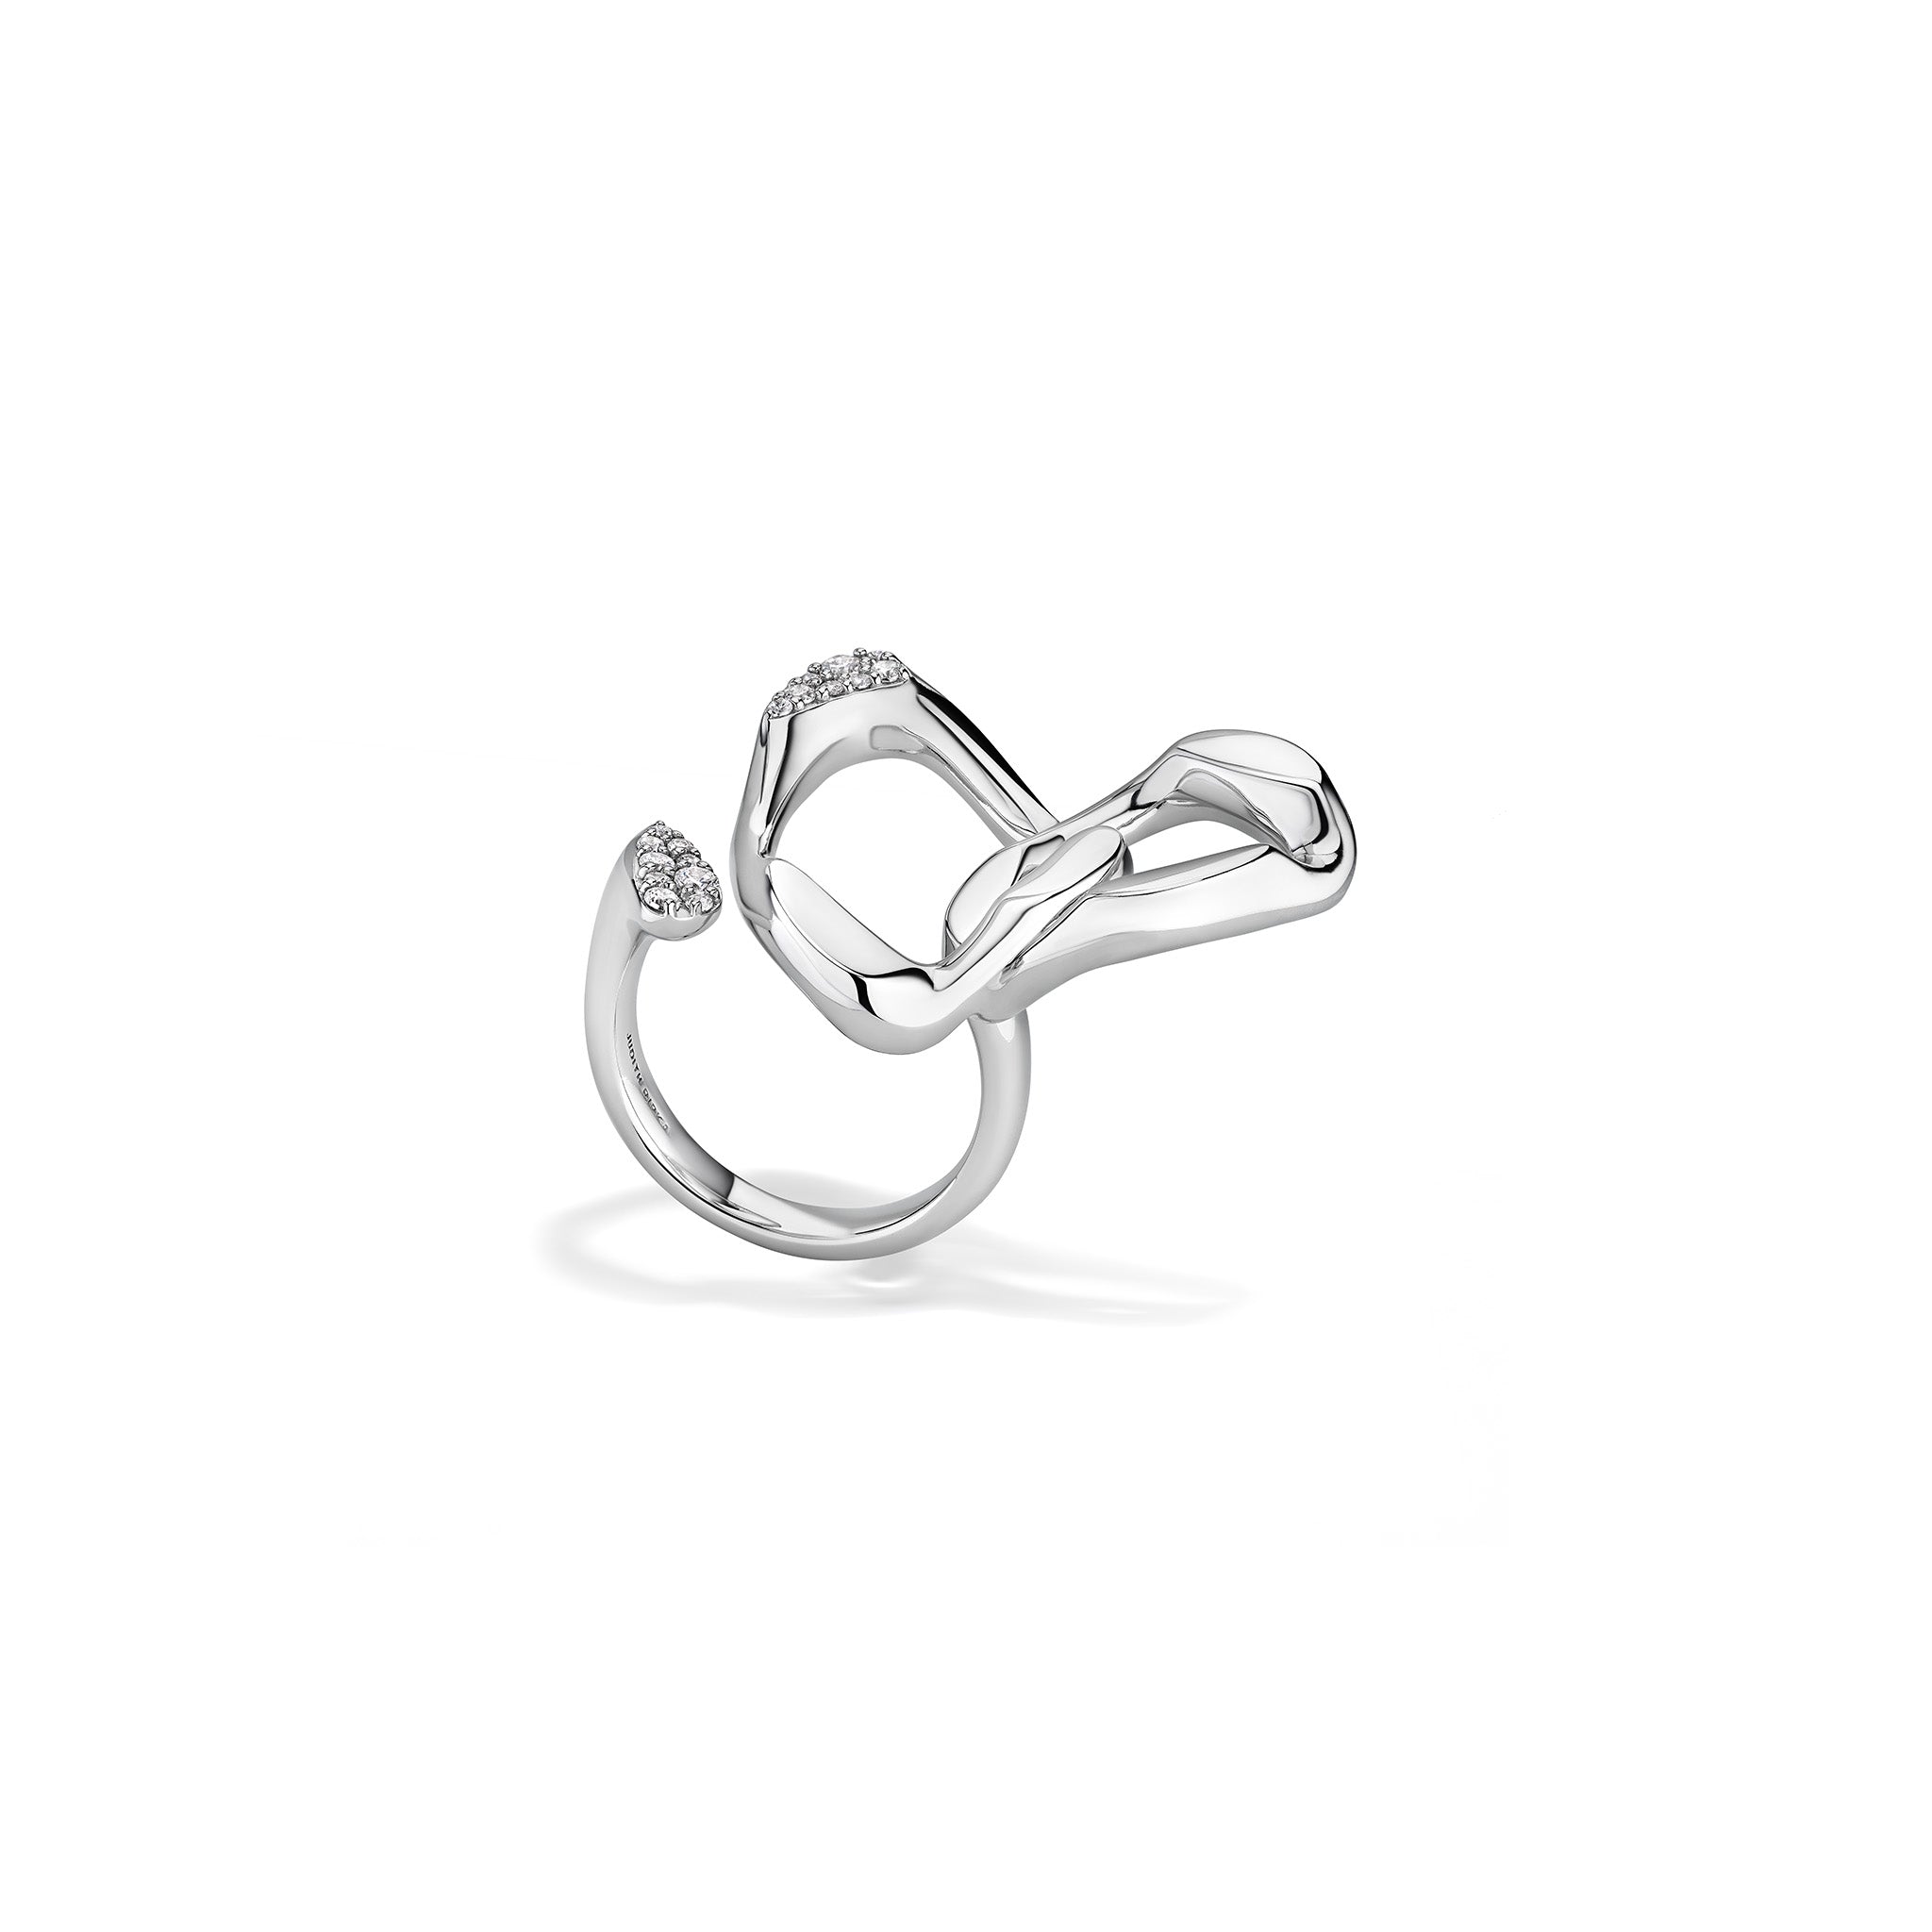 Gaia Two-Finger Ring with Diamonds